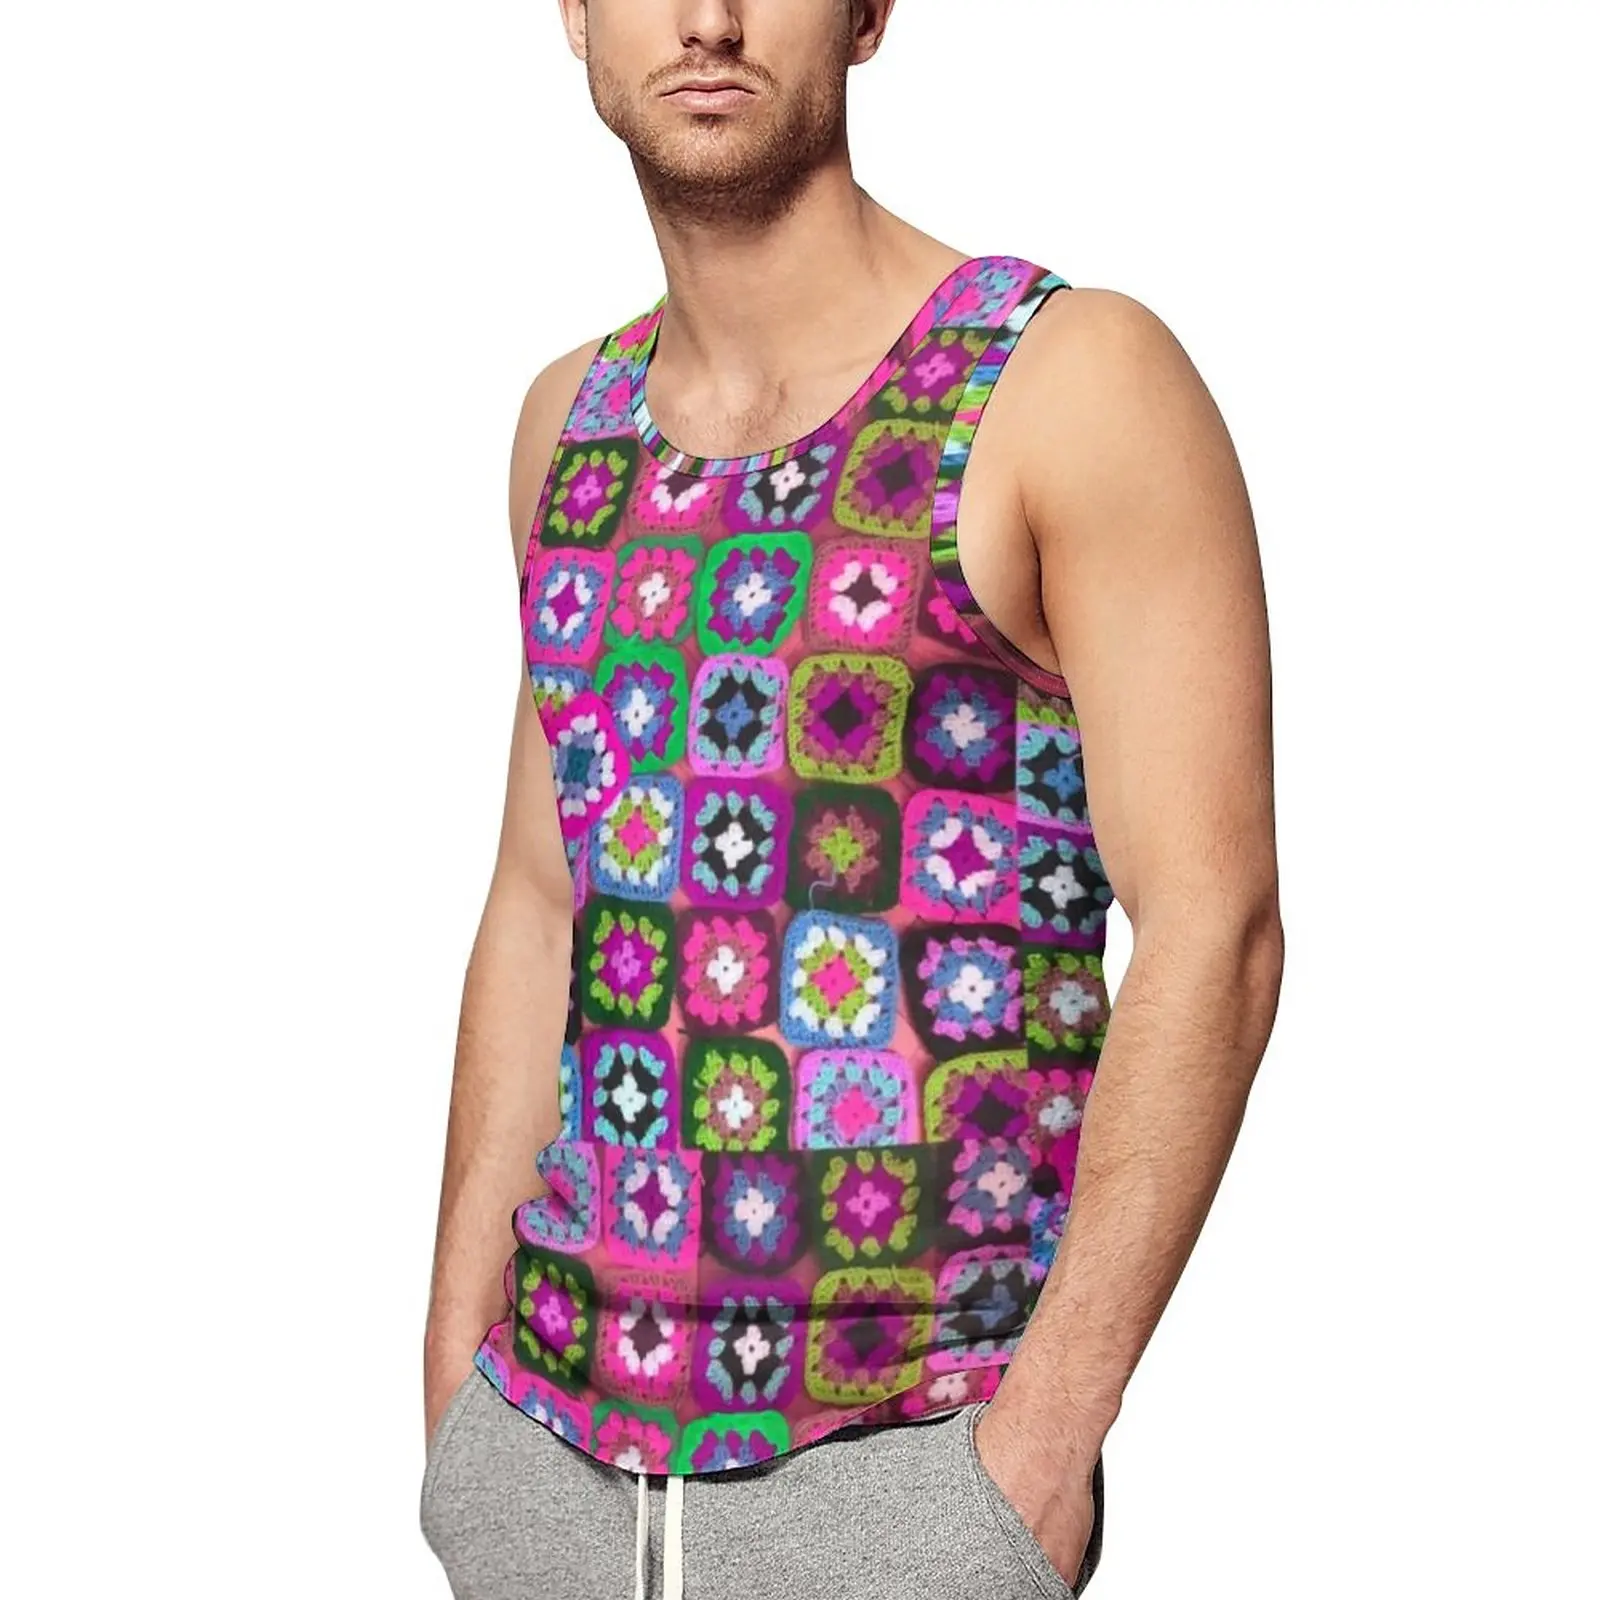 

Hippy Peace Tank Top Square Vintage Print Sportswear Tops Summer Gym Man Printed Sleeveless Vests Big Size